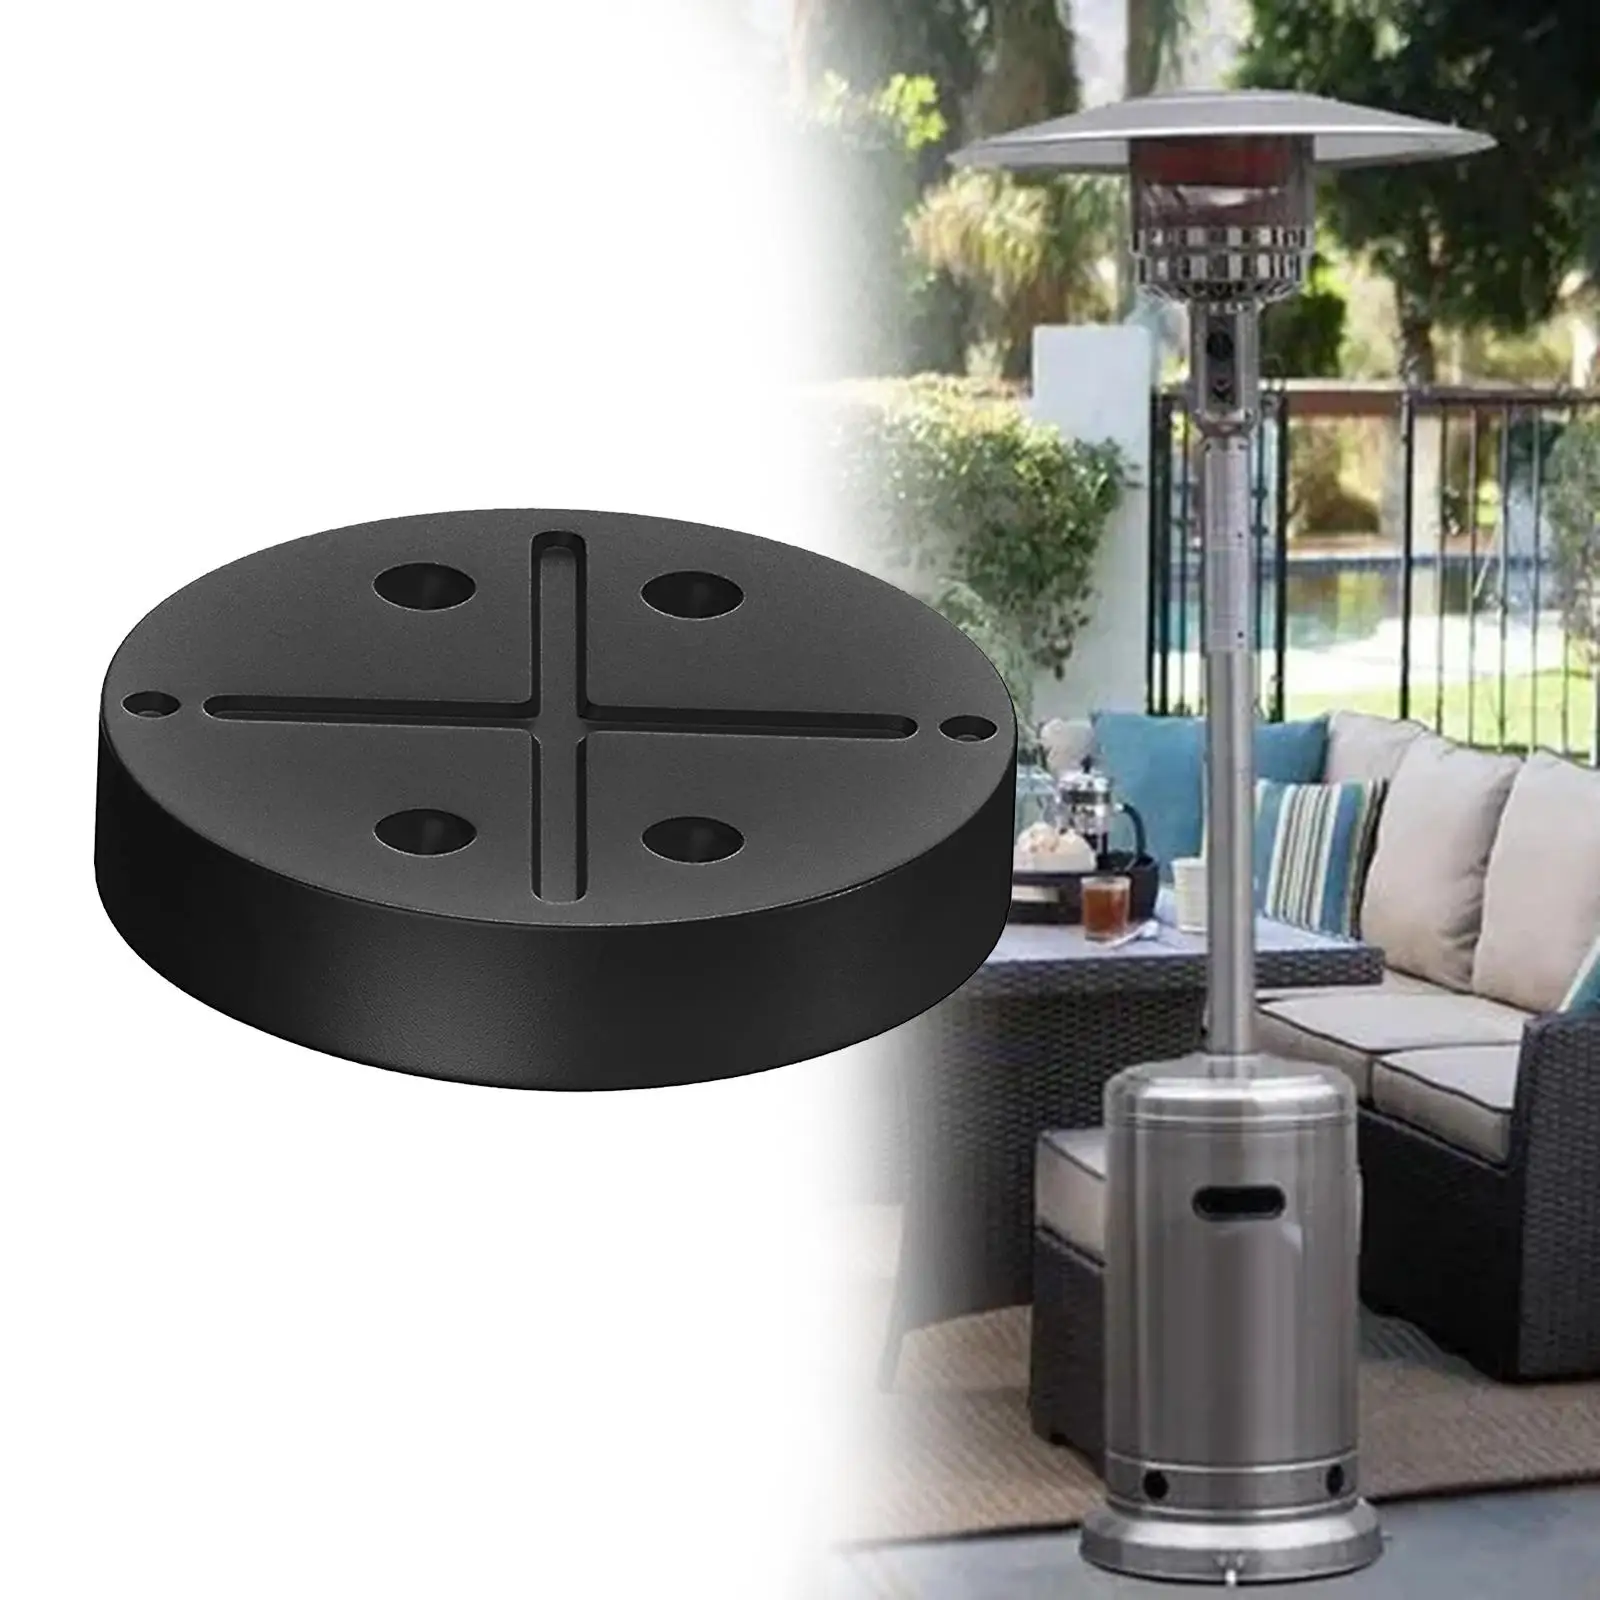 Patio Heater Sand Box/Water Box Spare Parts Premium Replacement Increase The Stability of Patio Heaters Patio Heater Accessory